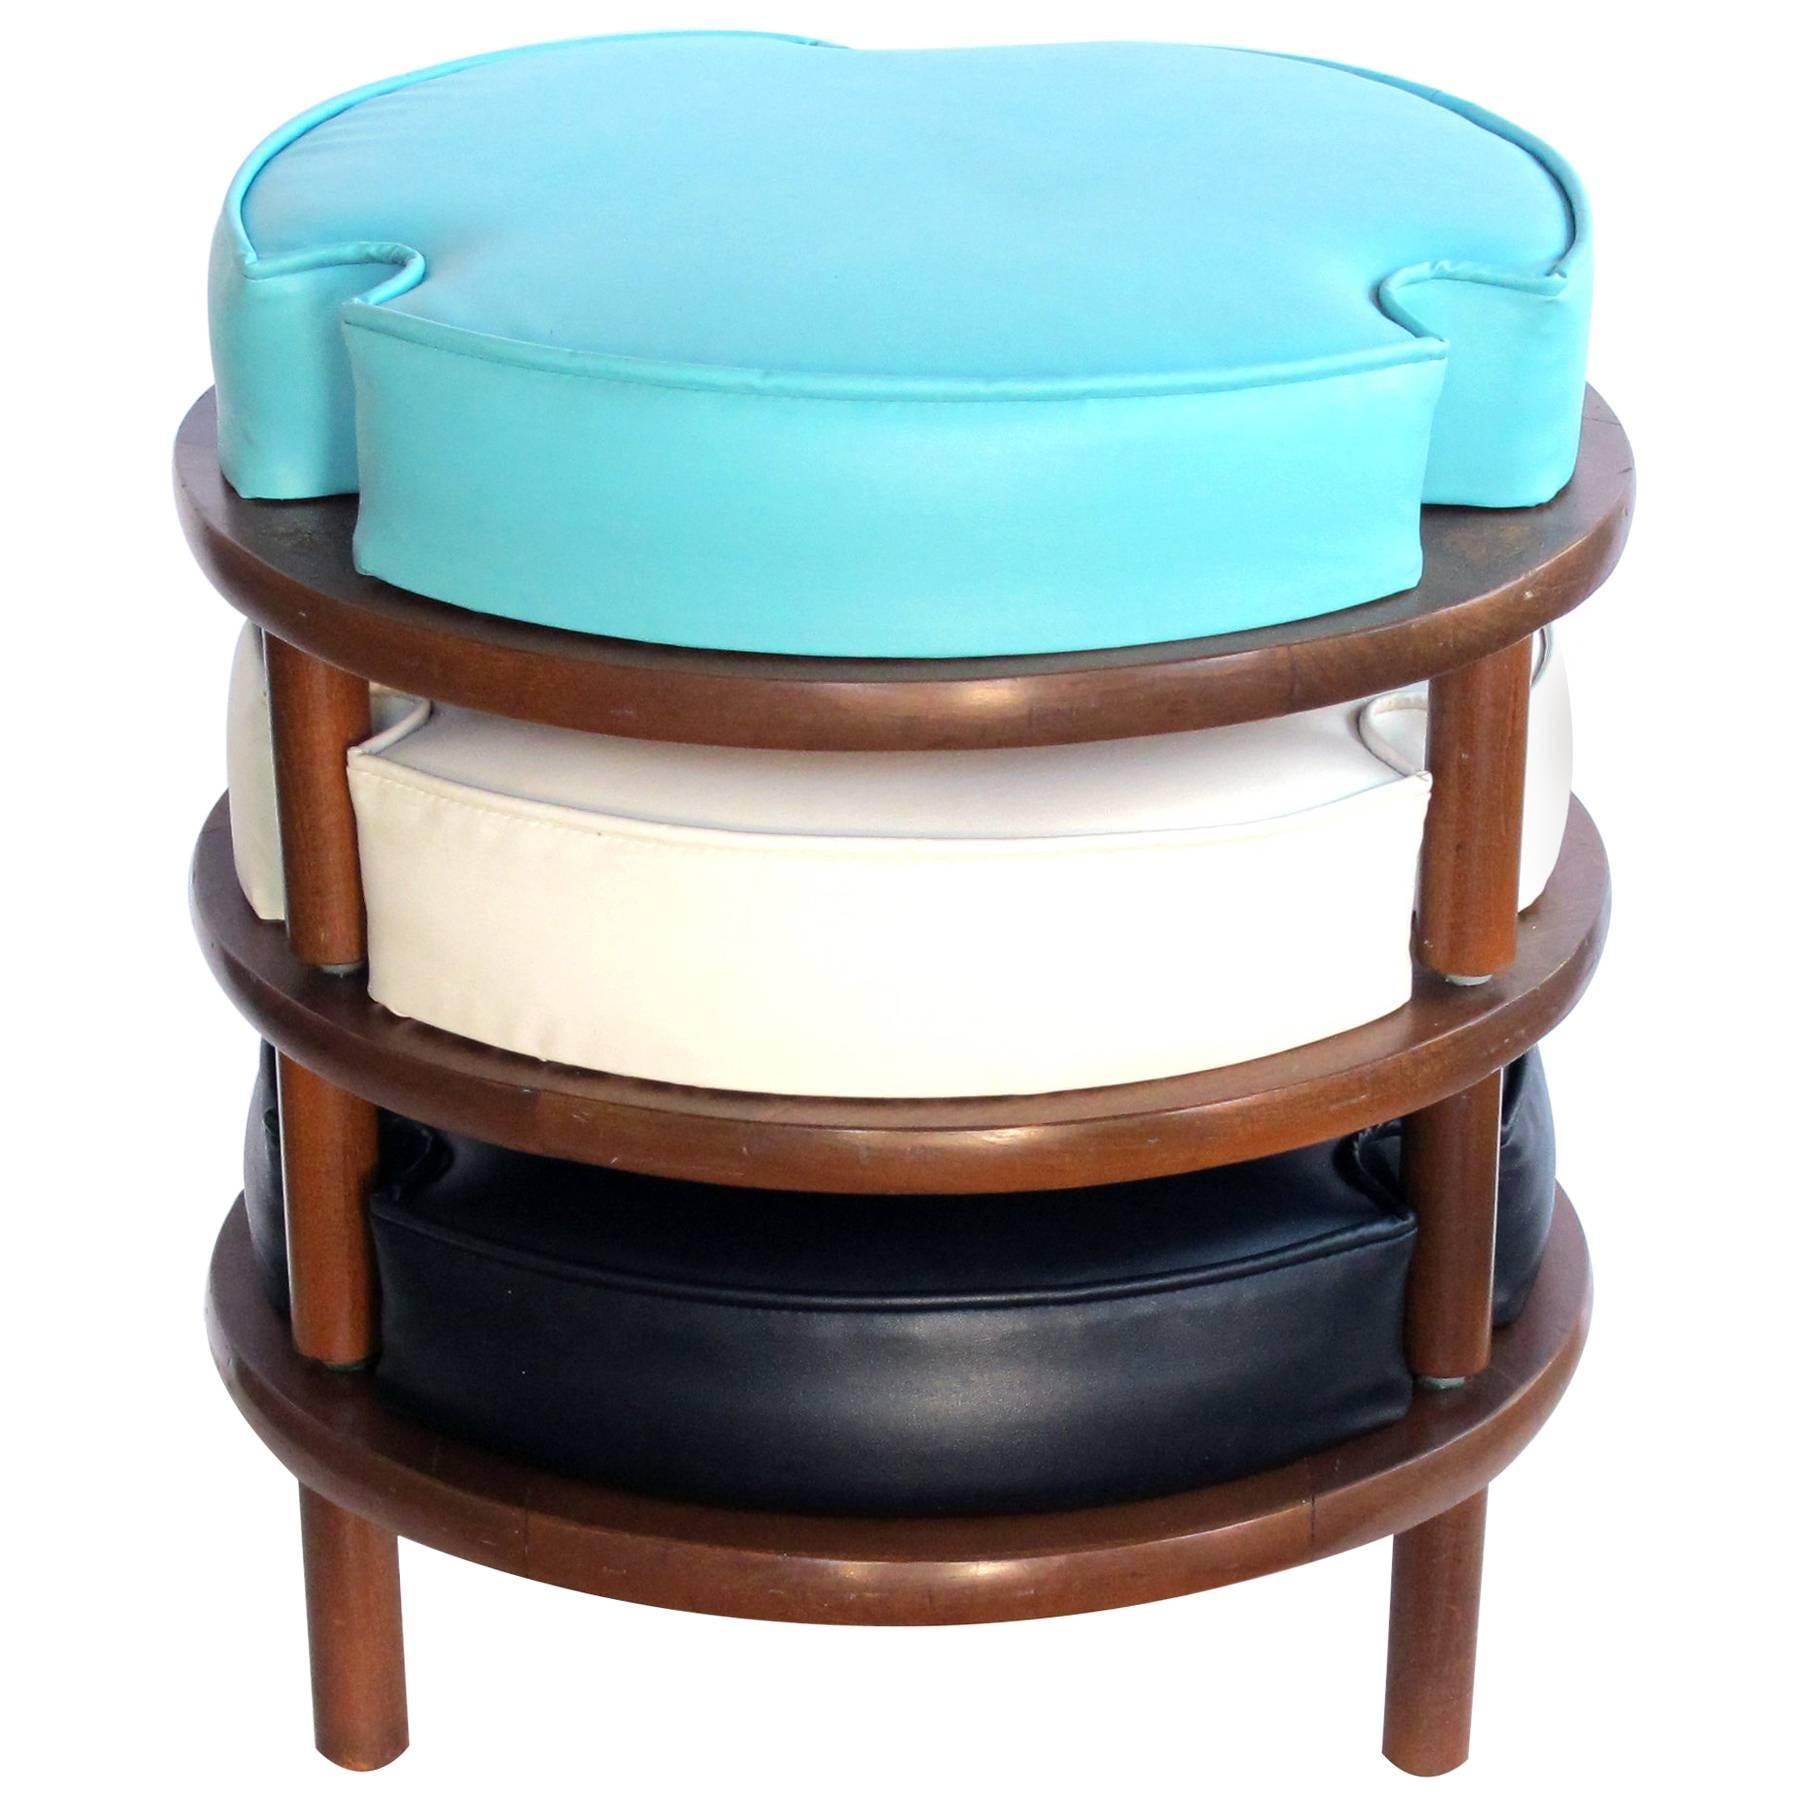 Mod and Fun American Mid-Century Set of Three Round Stackable Stools